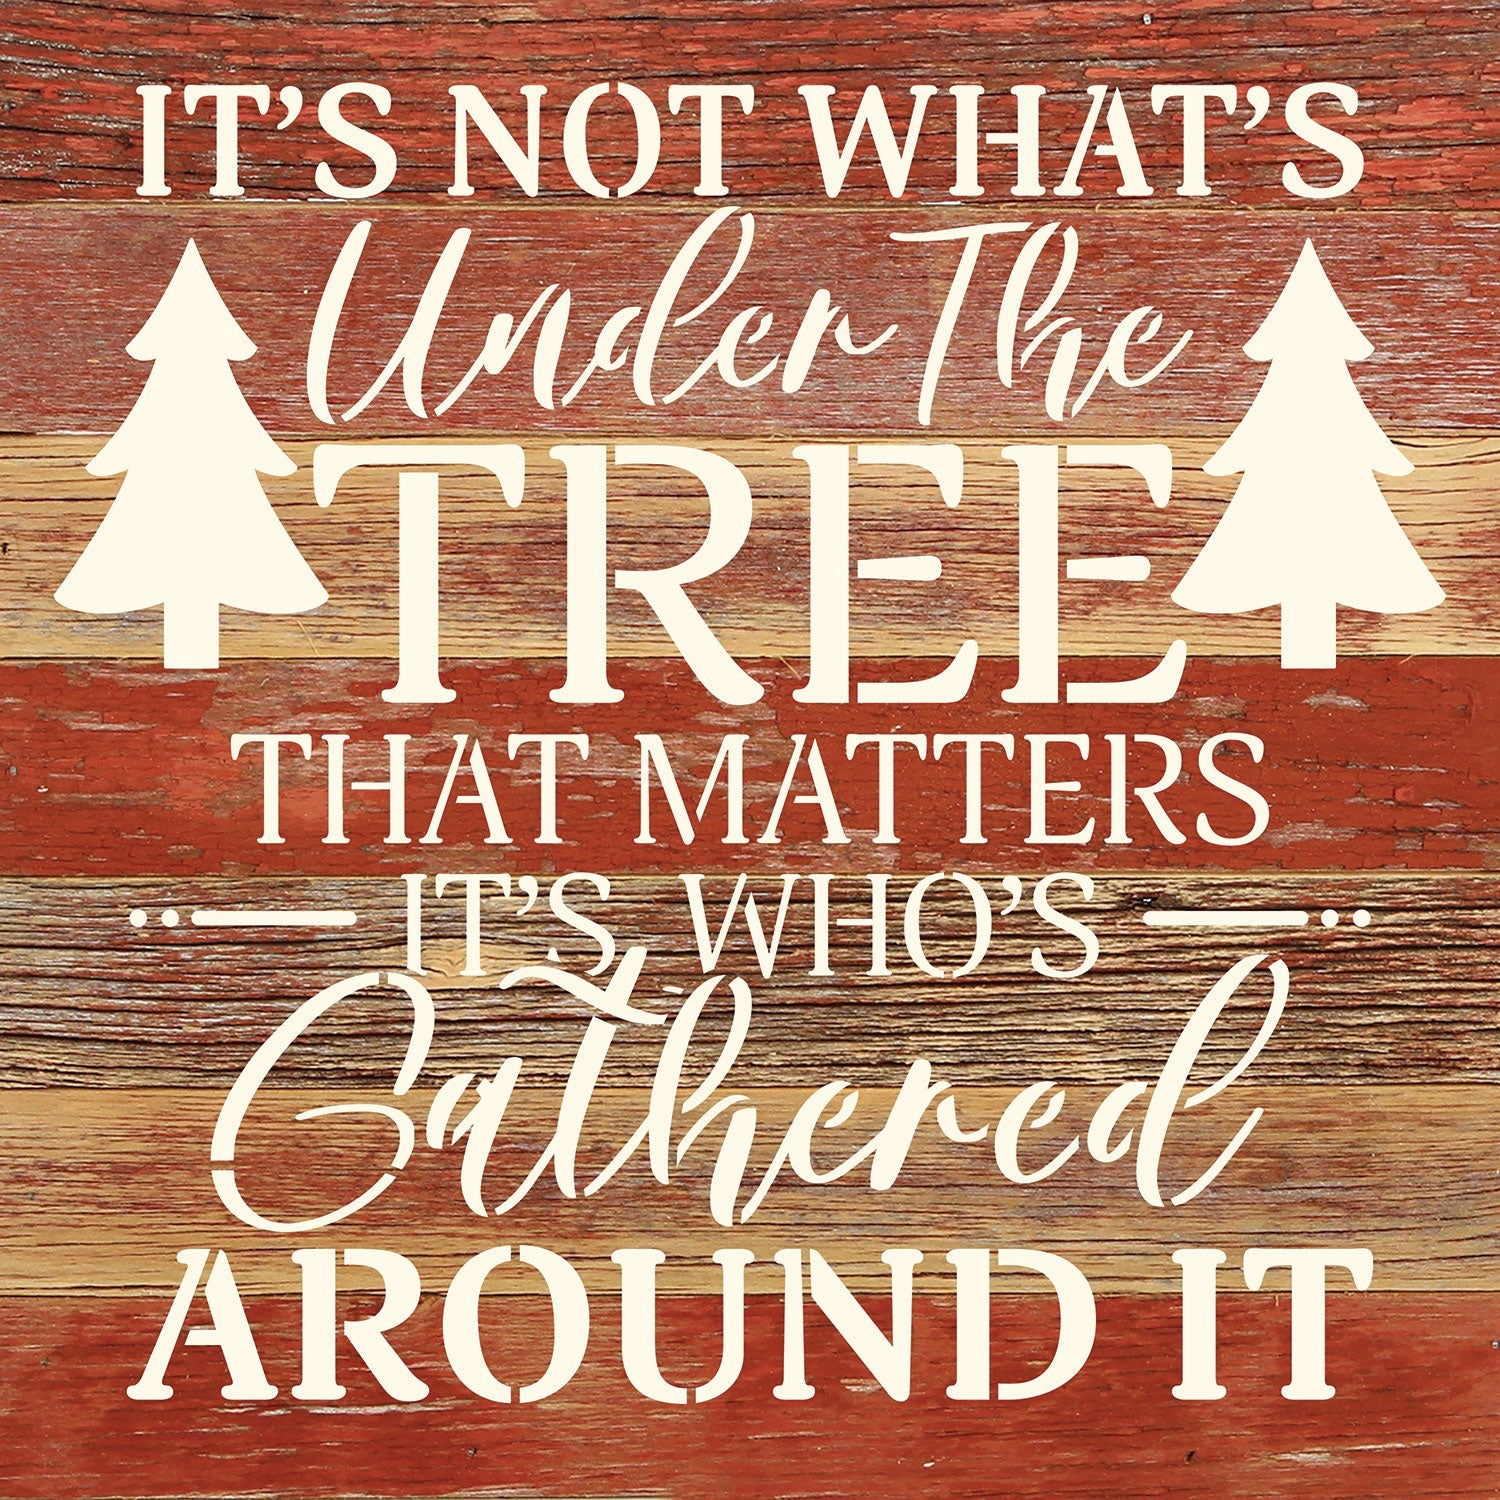 It's not what's under the tree that matters it's who's gathered around it / 10x10 Reclaimed Wood Wall Decor